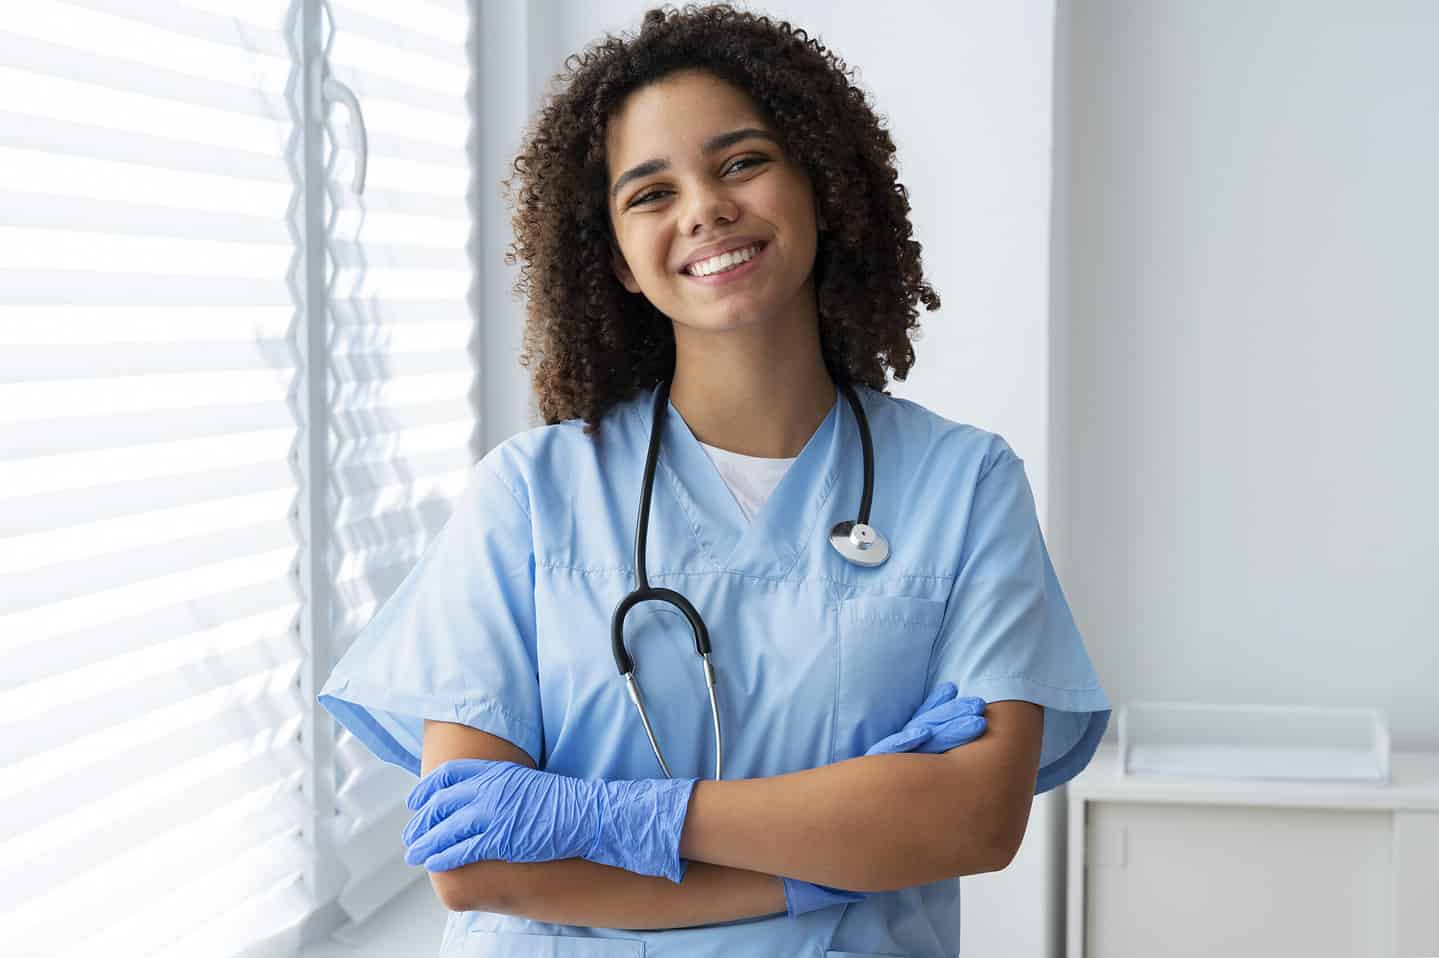 The Top 8 Reasons to Become a Nurse - Care Options for Kids